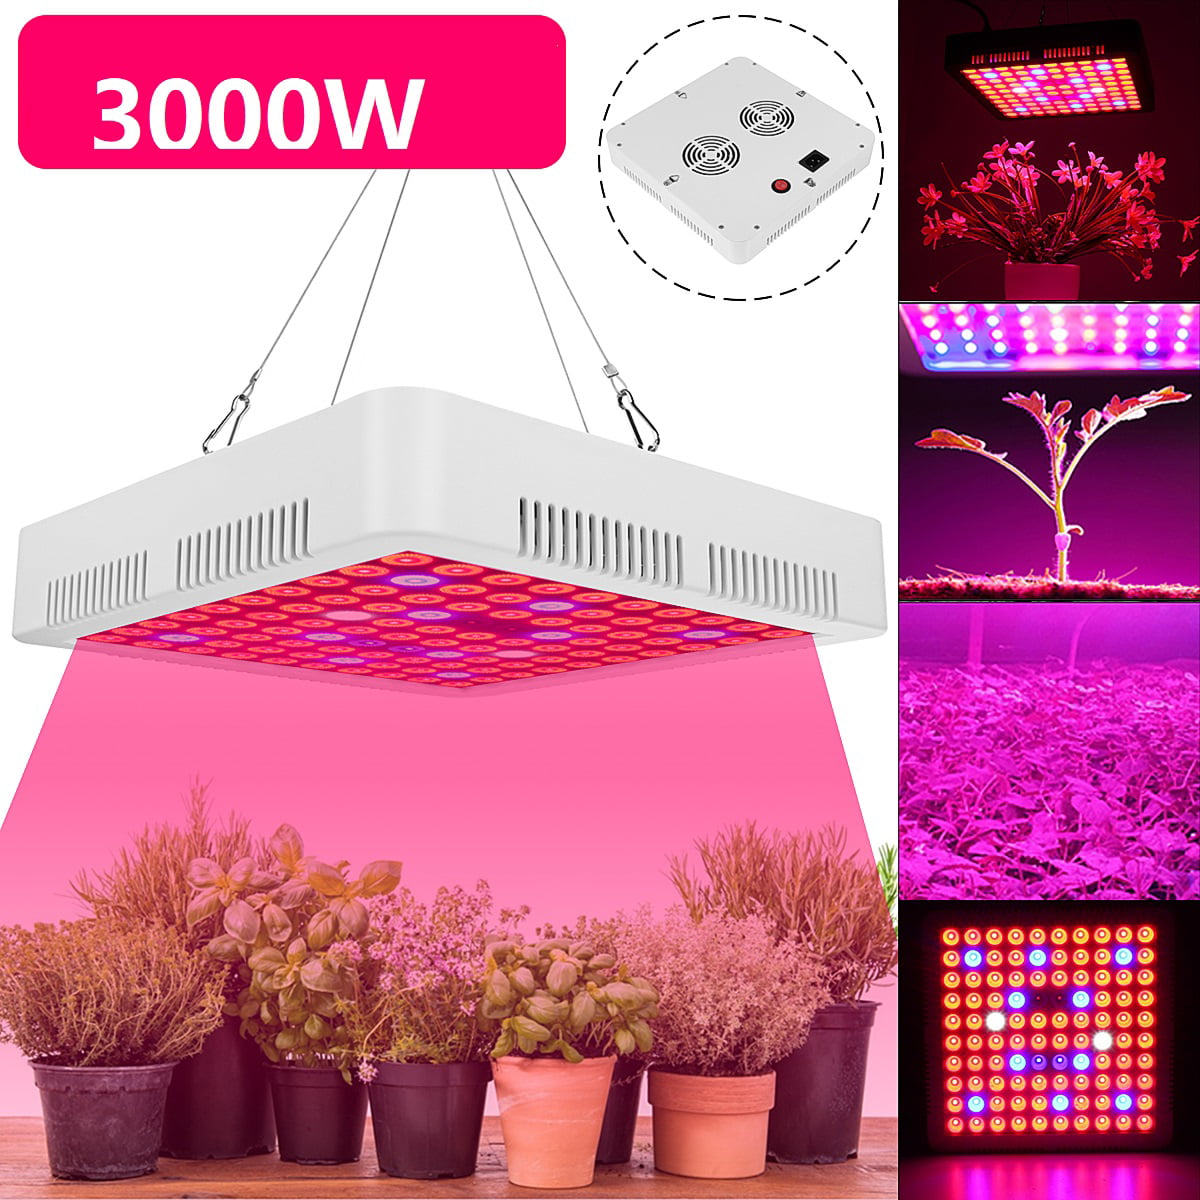 100W LED Grow Lights Panel for Indoor Plants Grow Lamp with Stand Full Spectrum 